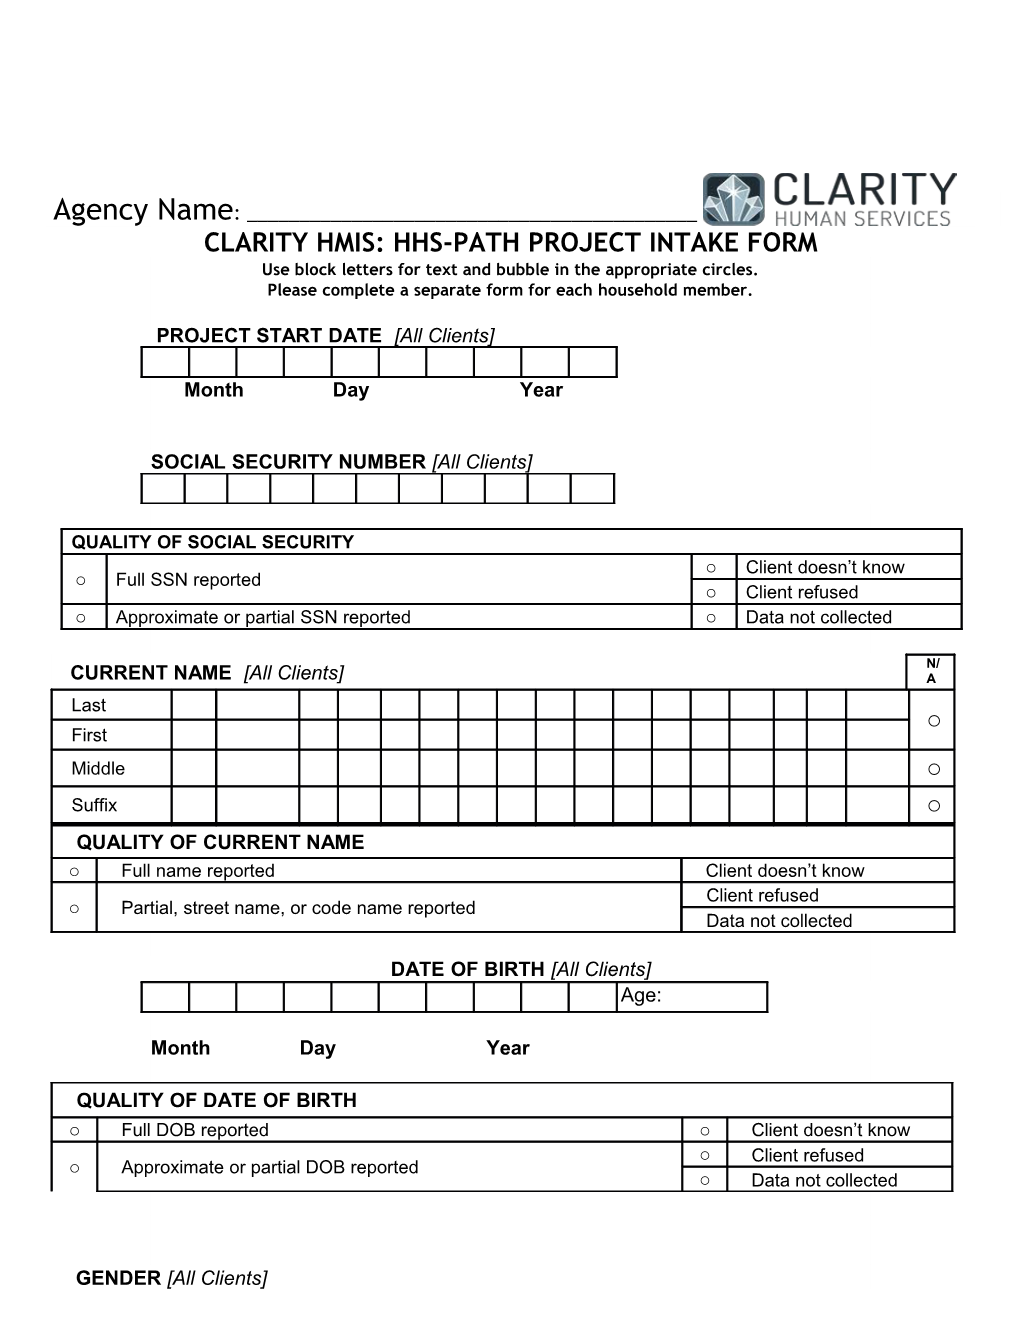 Clarity Hmis: Hhs-Path Project Intake Form